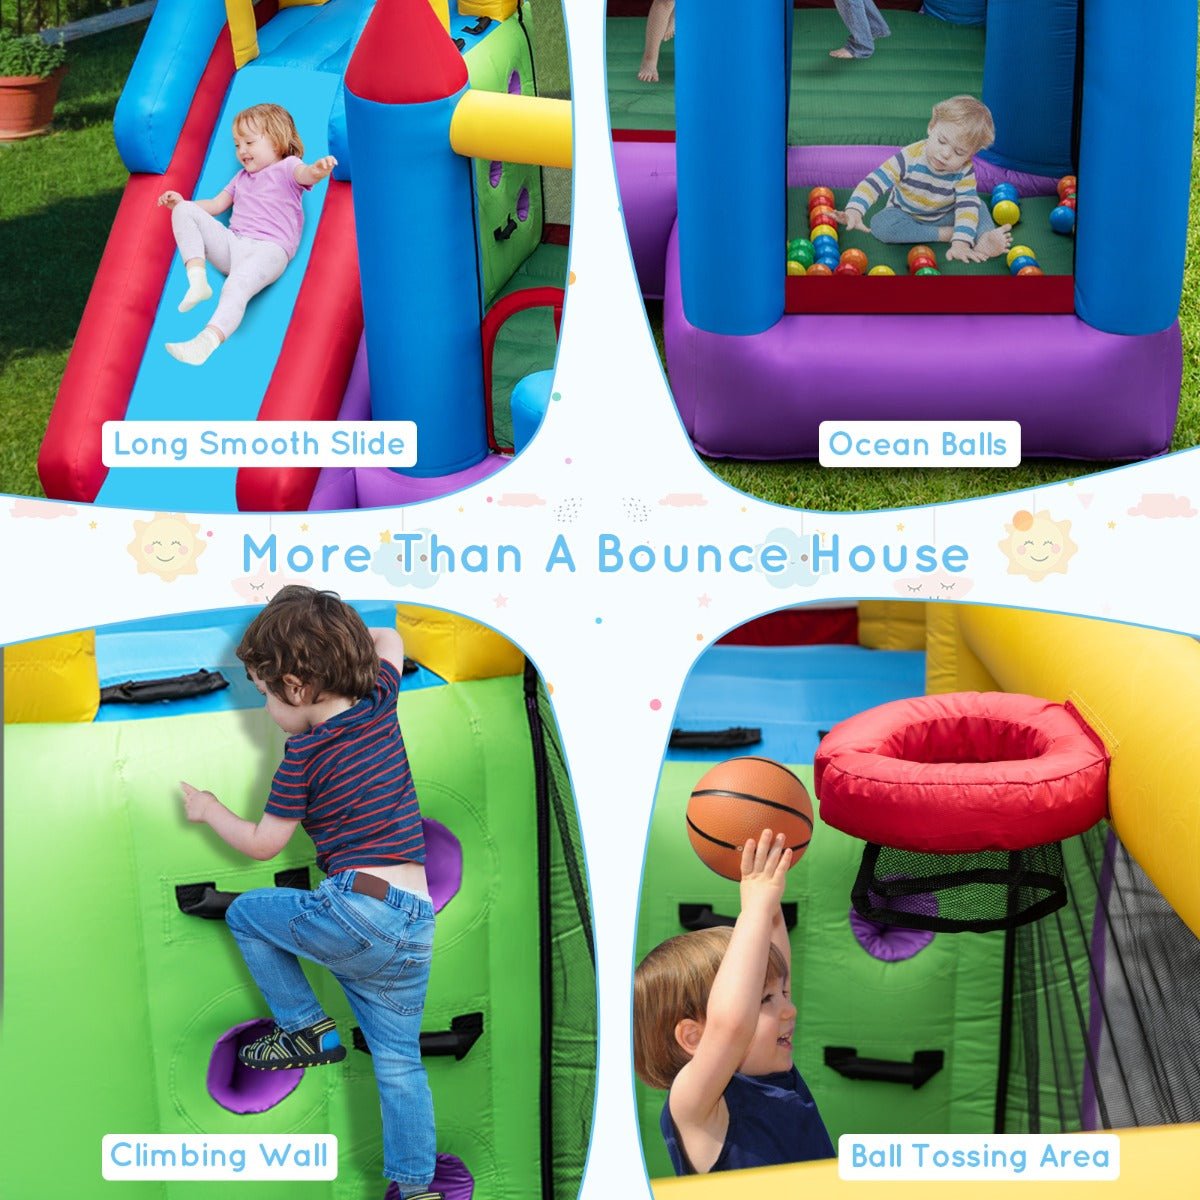 Children's Slide, Trampoline & Inflatable Playhouse - All-in-One Fun (Air Blower Excluded)